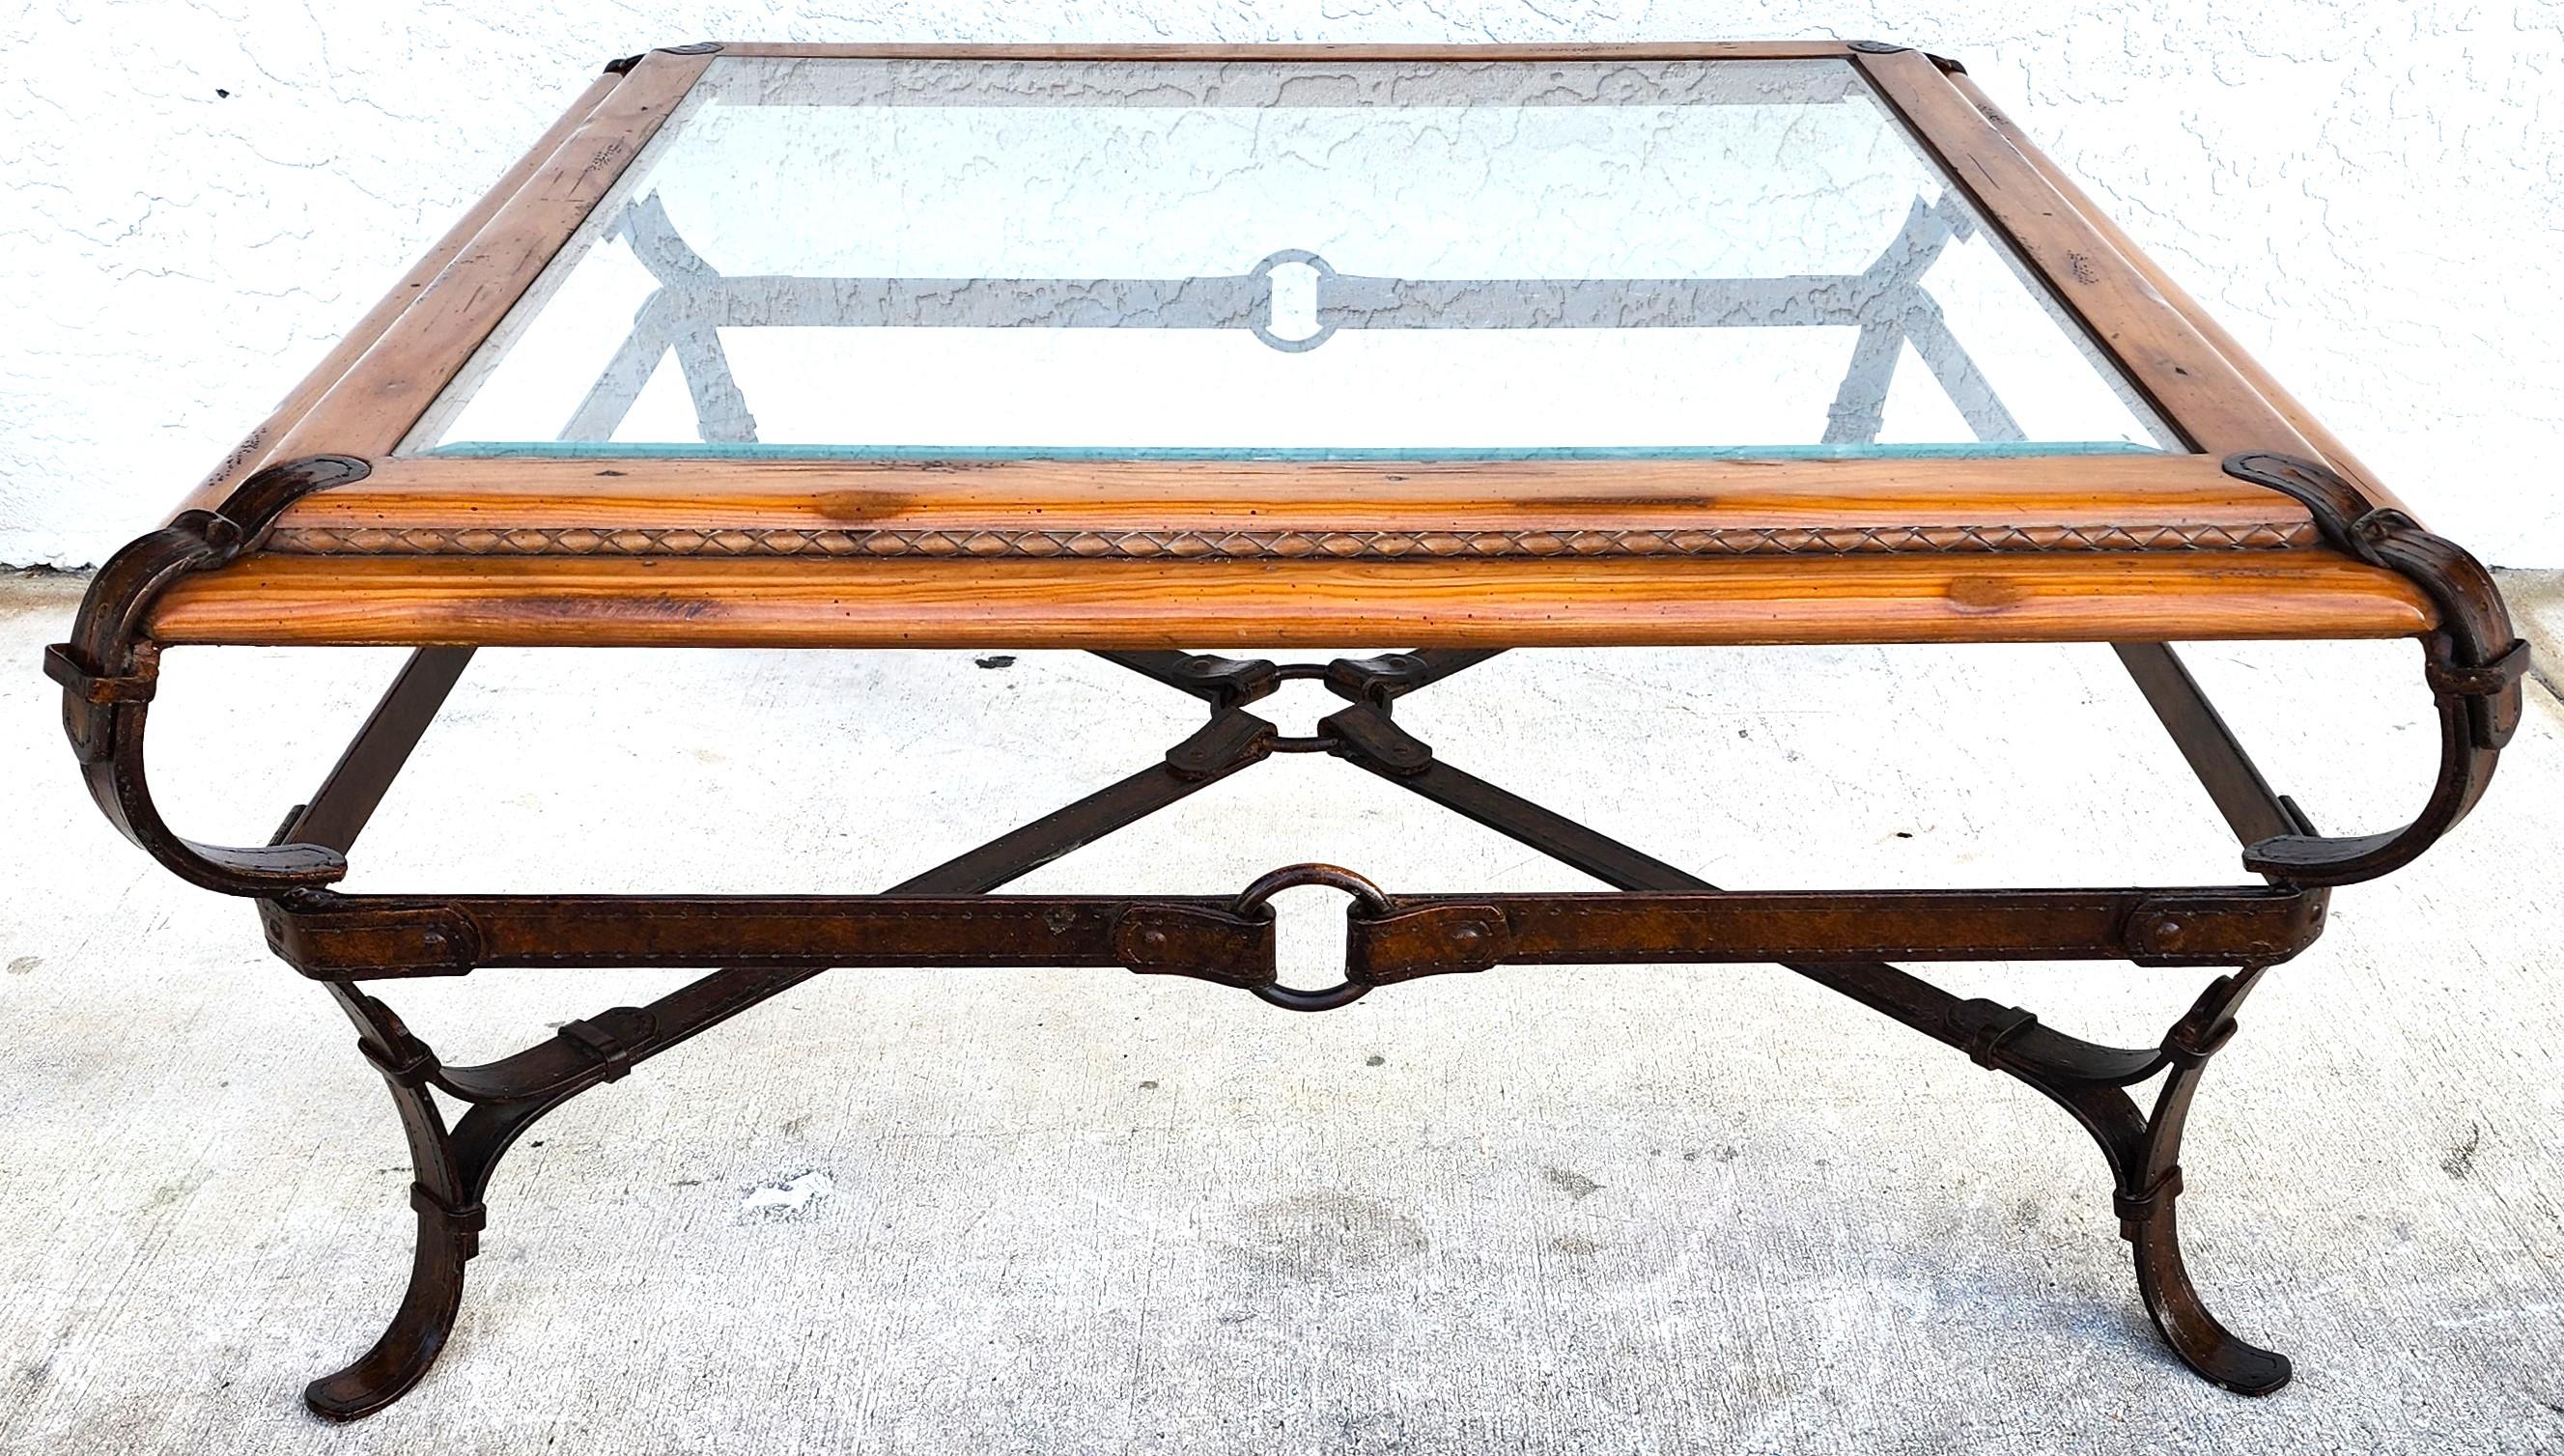 For FULL item description click on CONTINUE READING at the bottom of this page.

Offering One Of Our Recent Palm Beach Estate Fine Furniture Acquisitions Of A
Vintage Jacques Adnet Hermes Style Equestrian Ranch Rustic Coffee Table
Featuring a